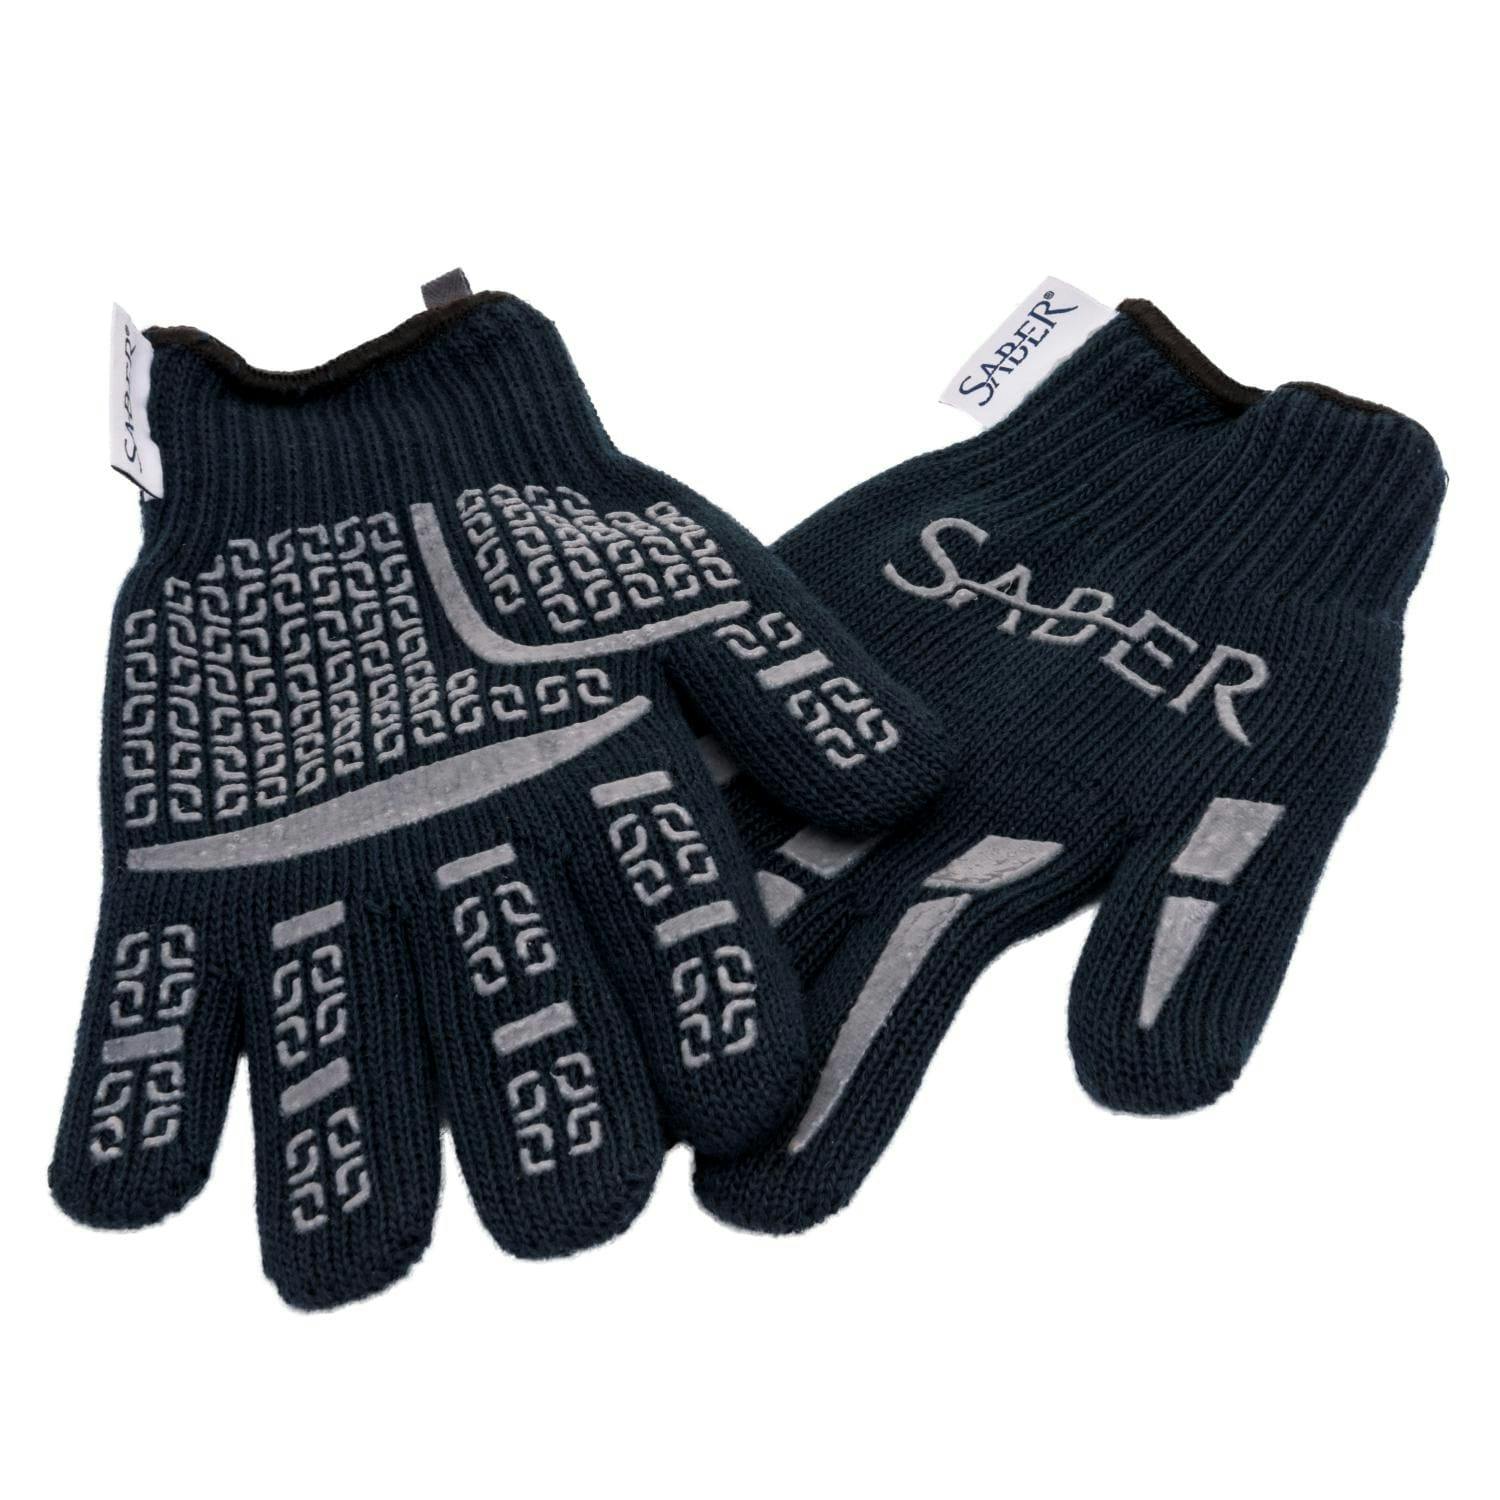 Saber High-Temperature Grill Gloves